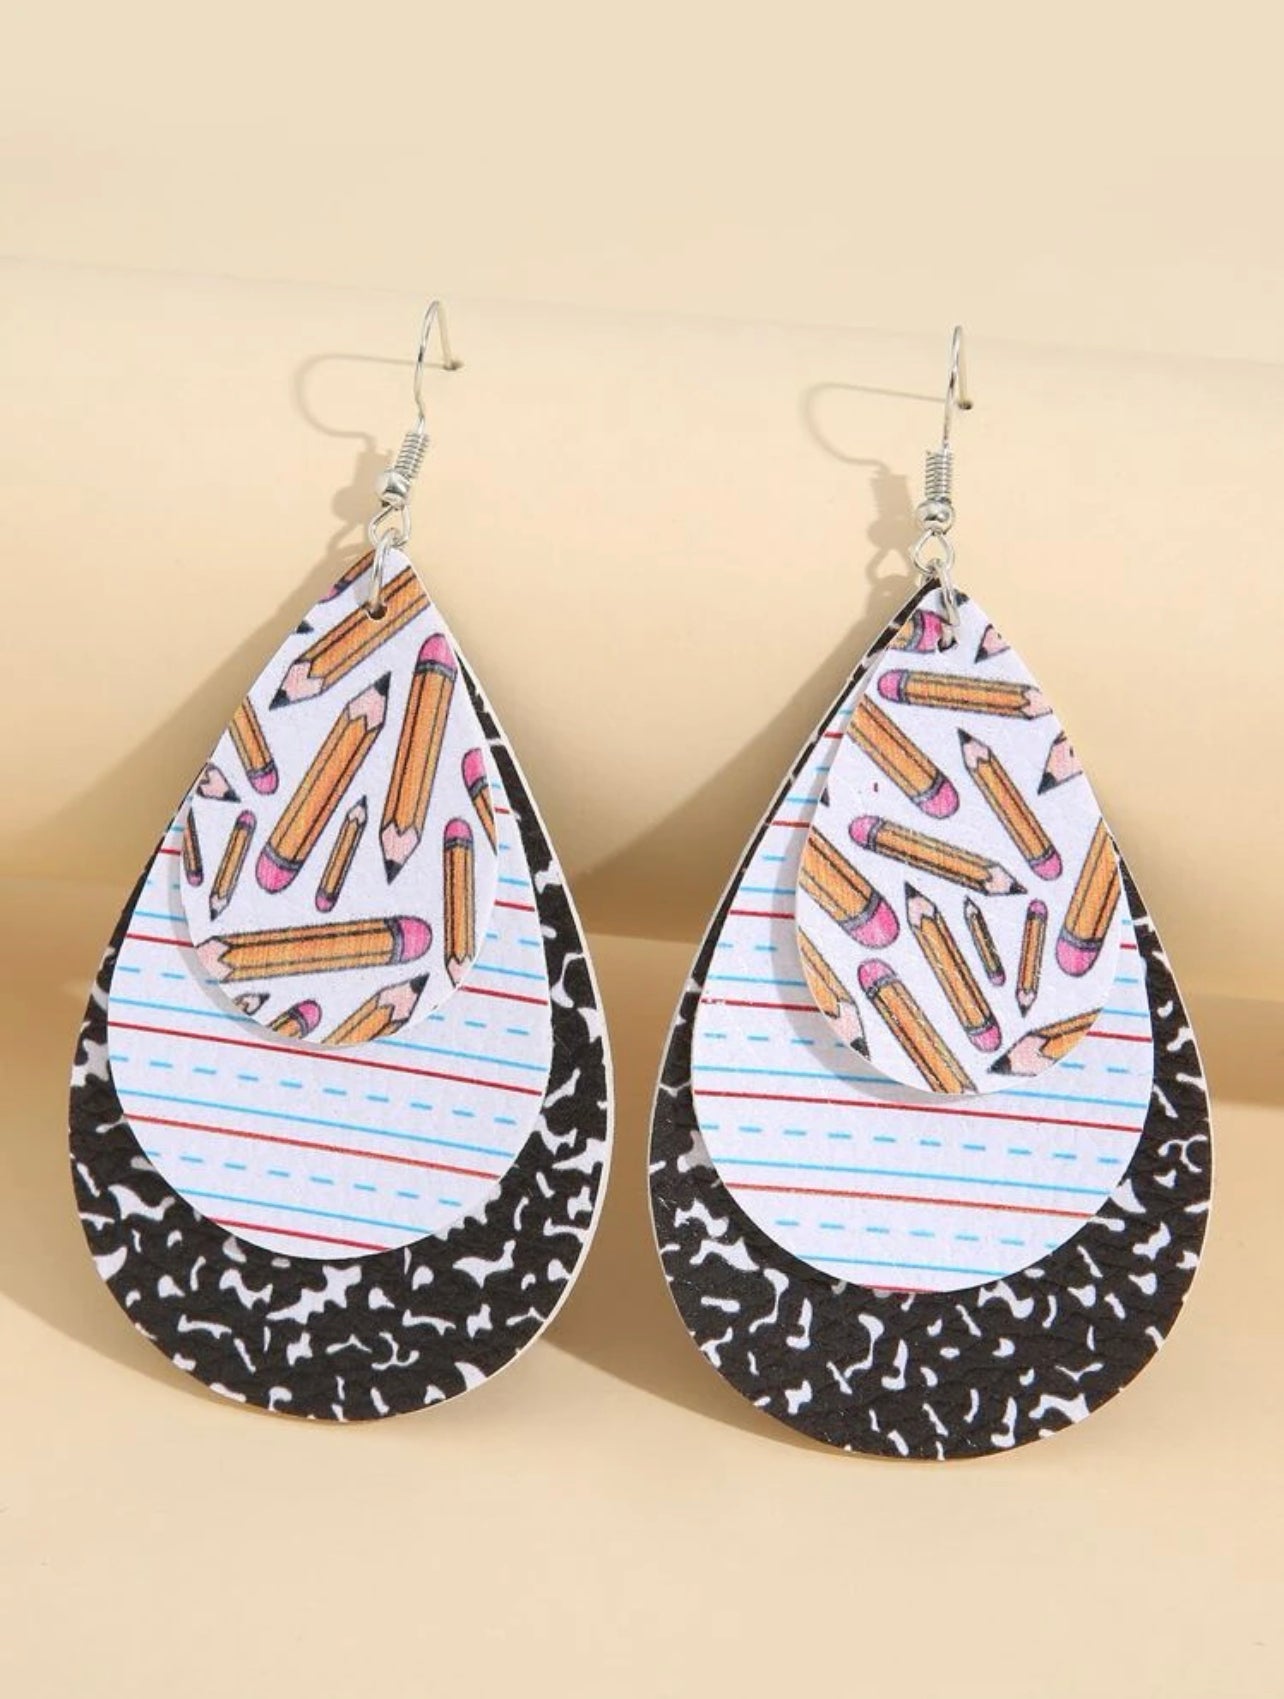 Pencils Paper And Composition Earrings